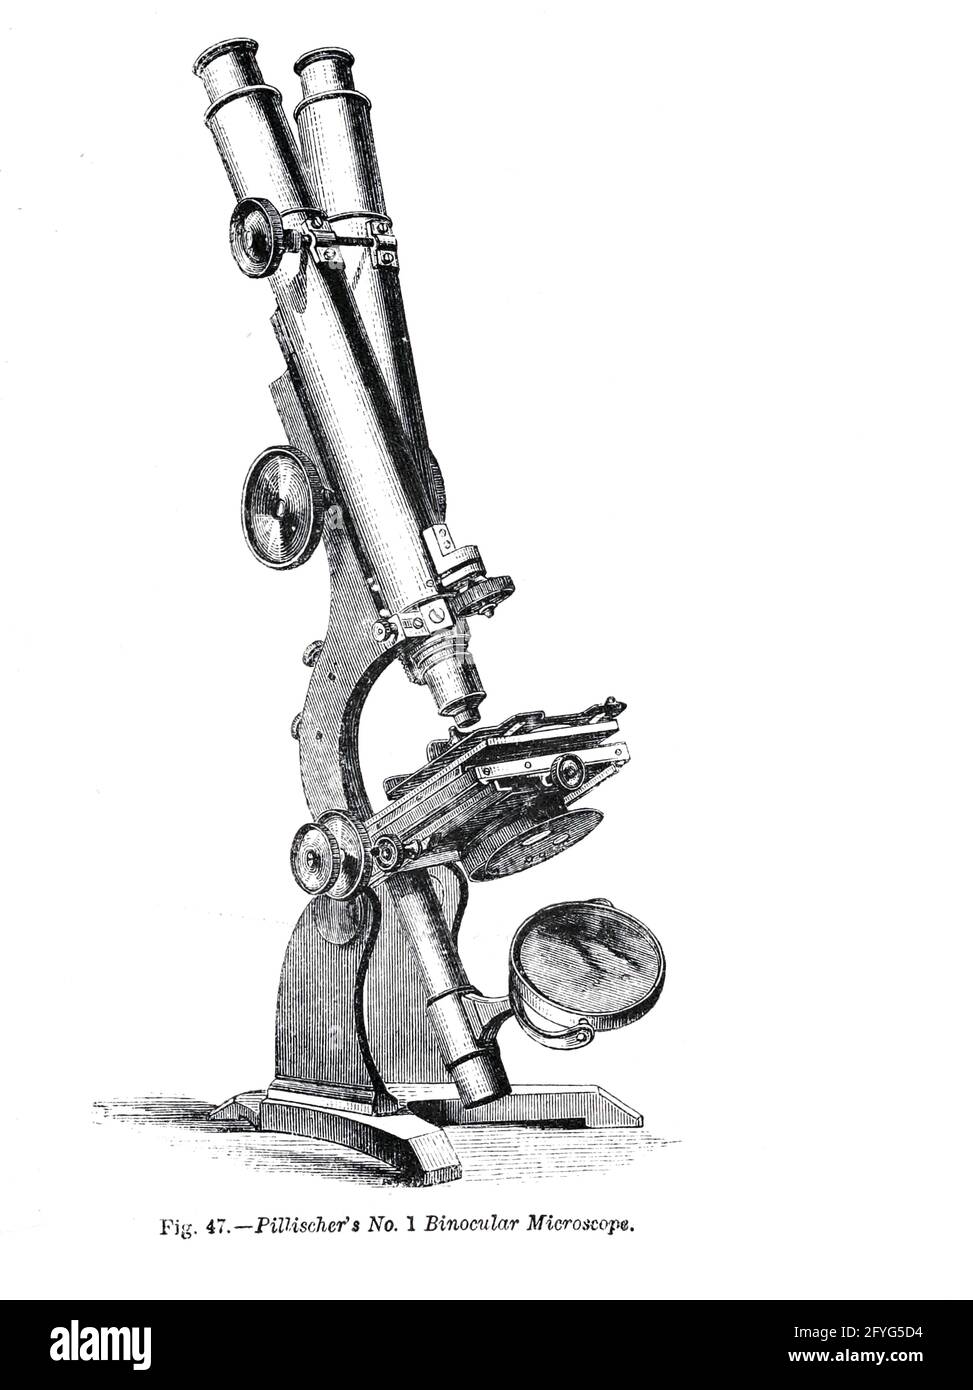 Fig. 47, Pillischer's No. 1 Binocular Microscope From the book '  The microscope : its history, construction, and application ' by Hogg, Jabez, 1817-1899 Published in London by G. Routledge in 1869 with Illustrations by TUFFEN WEST Stock Photo